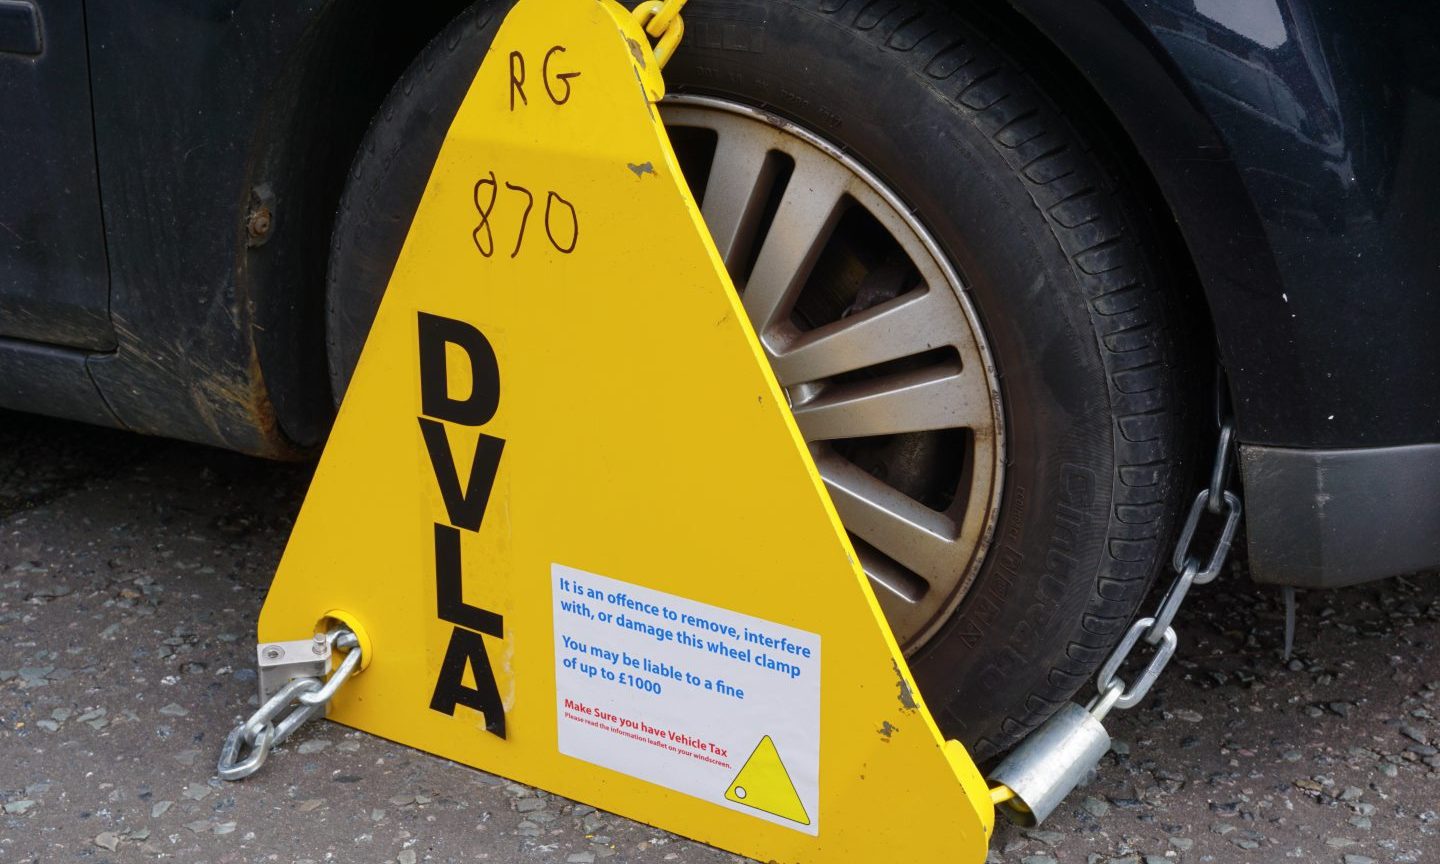 The DVLA have been clamping cars in Fife.